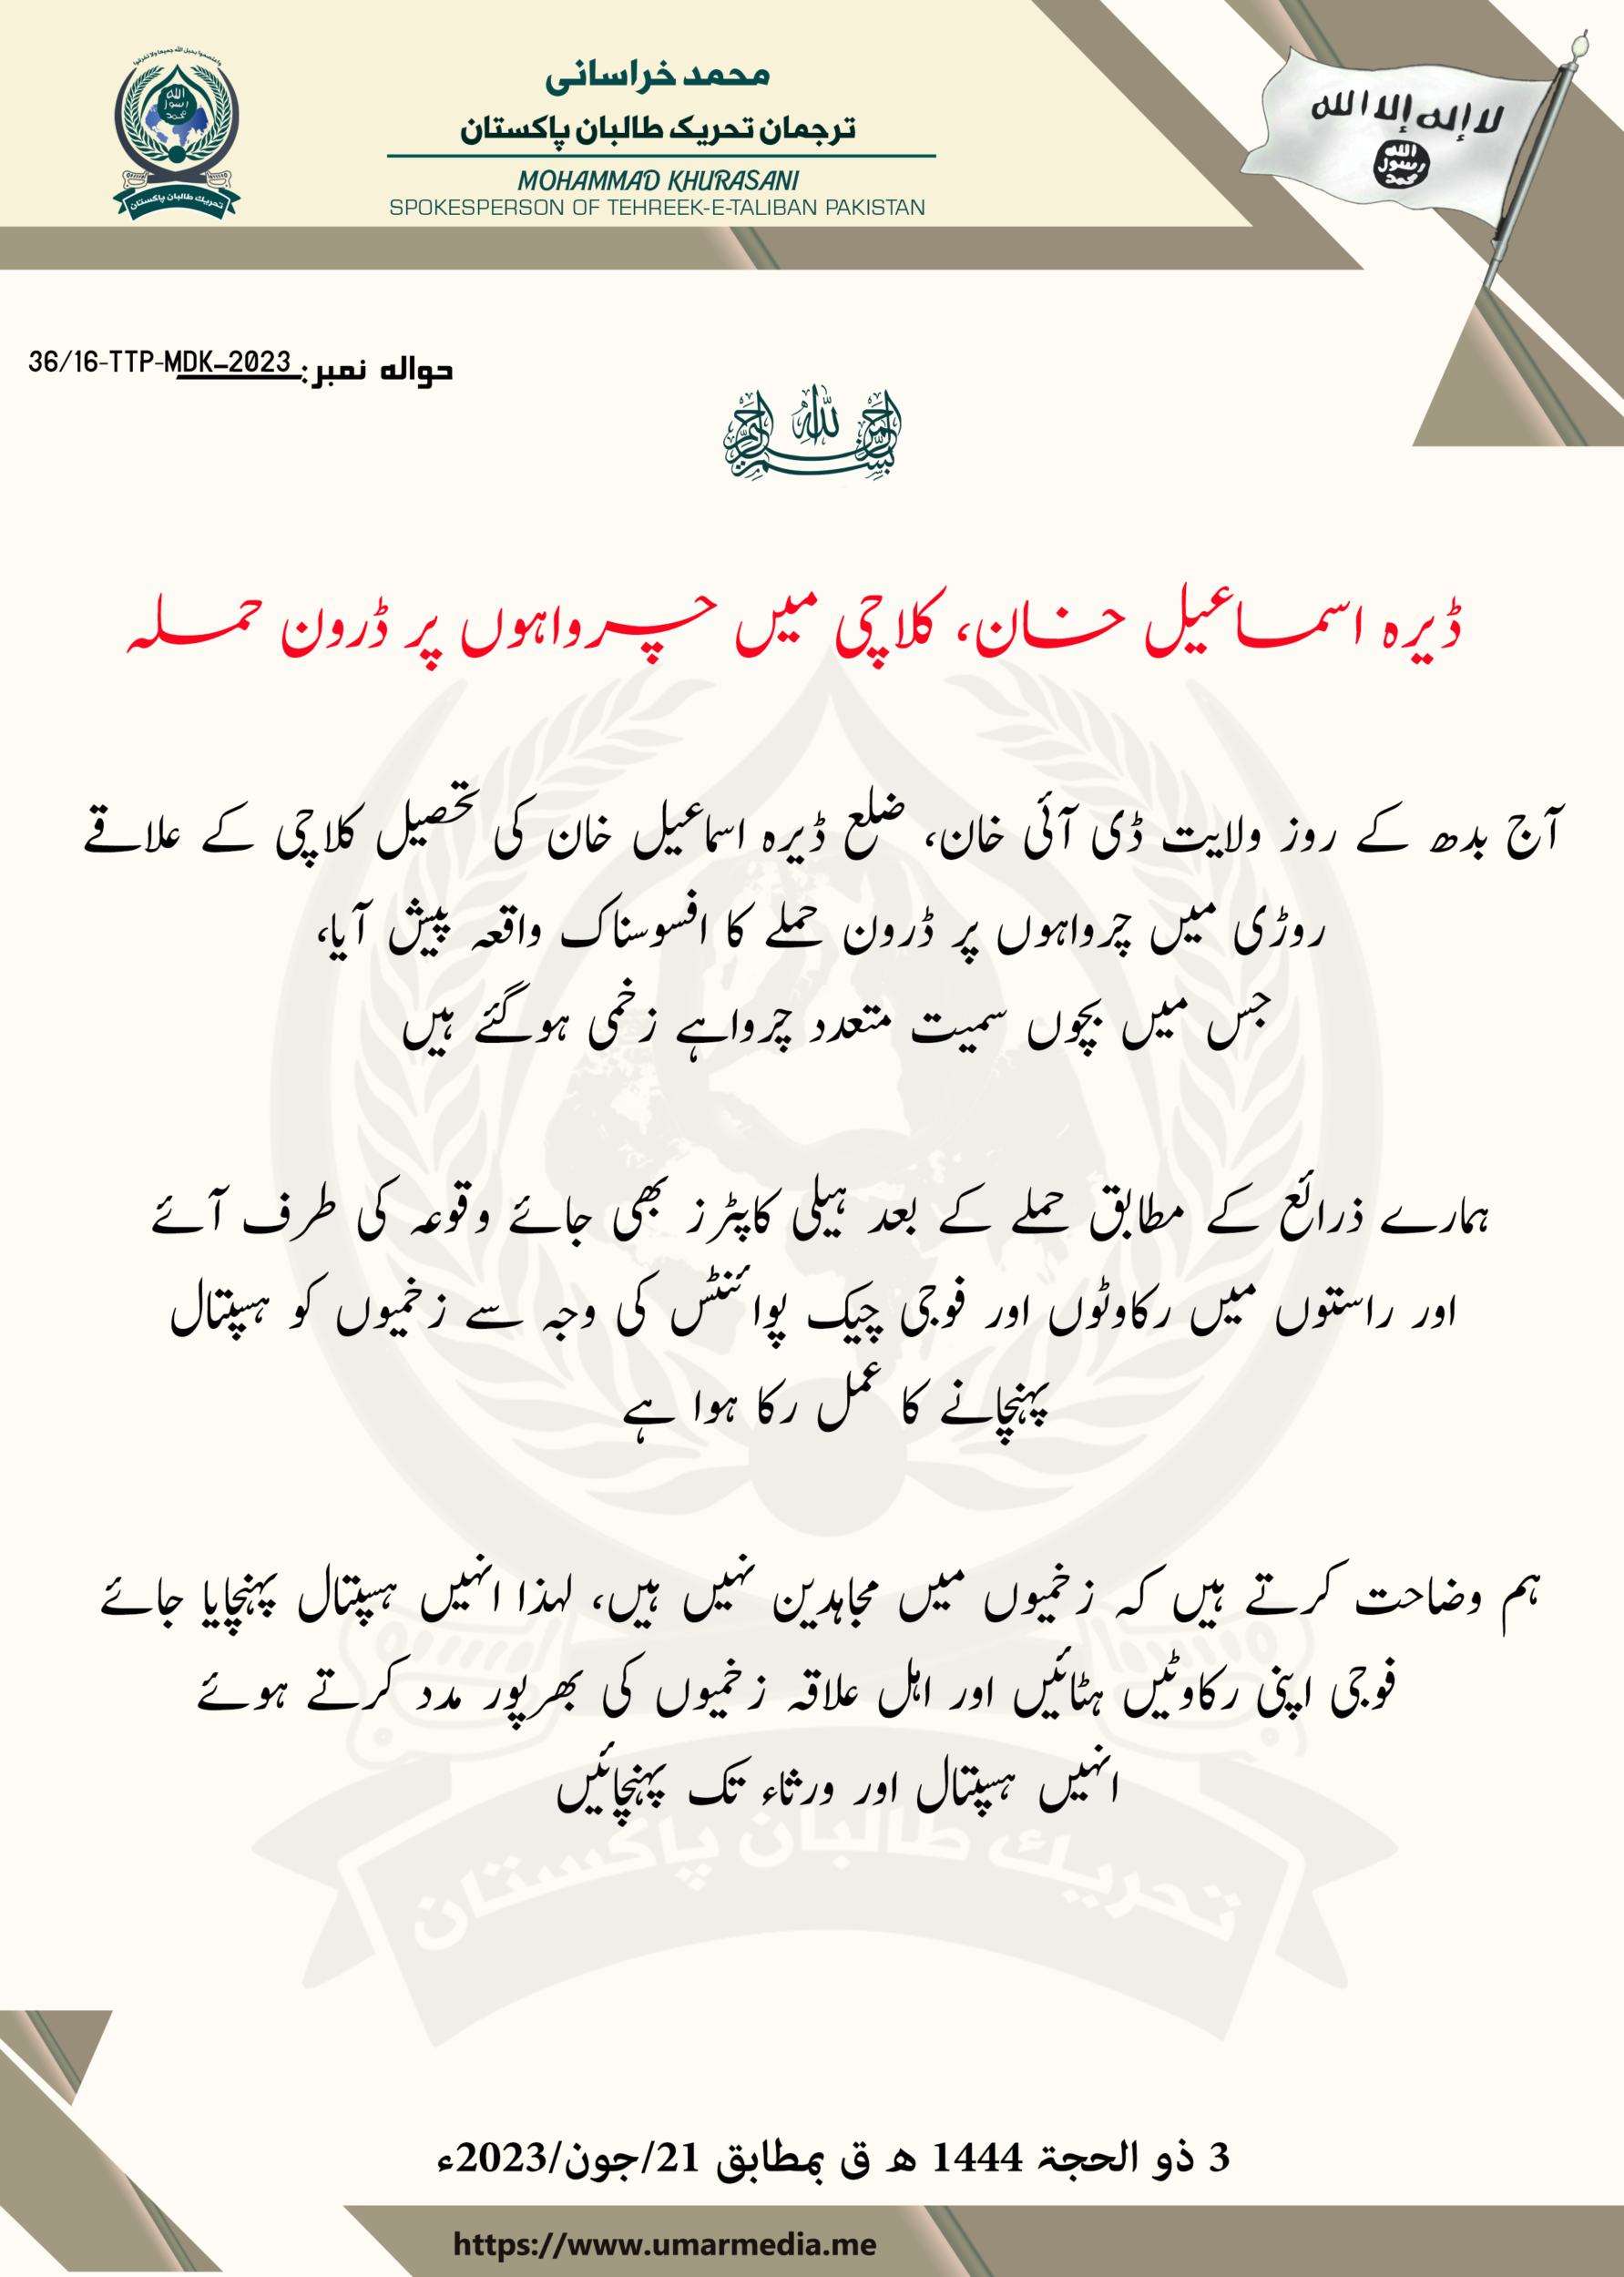 (Statement) Tehreek-e-Taliban Pakistan (TTP) Condemns Drone Attack Targeting Shepherds, Injuring a Number of them Including Children, in Kalachi, Dera Ismail Khan, Khyber Pakhtunkhwa, Pakistan - 21 June 2023